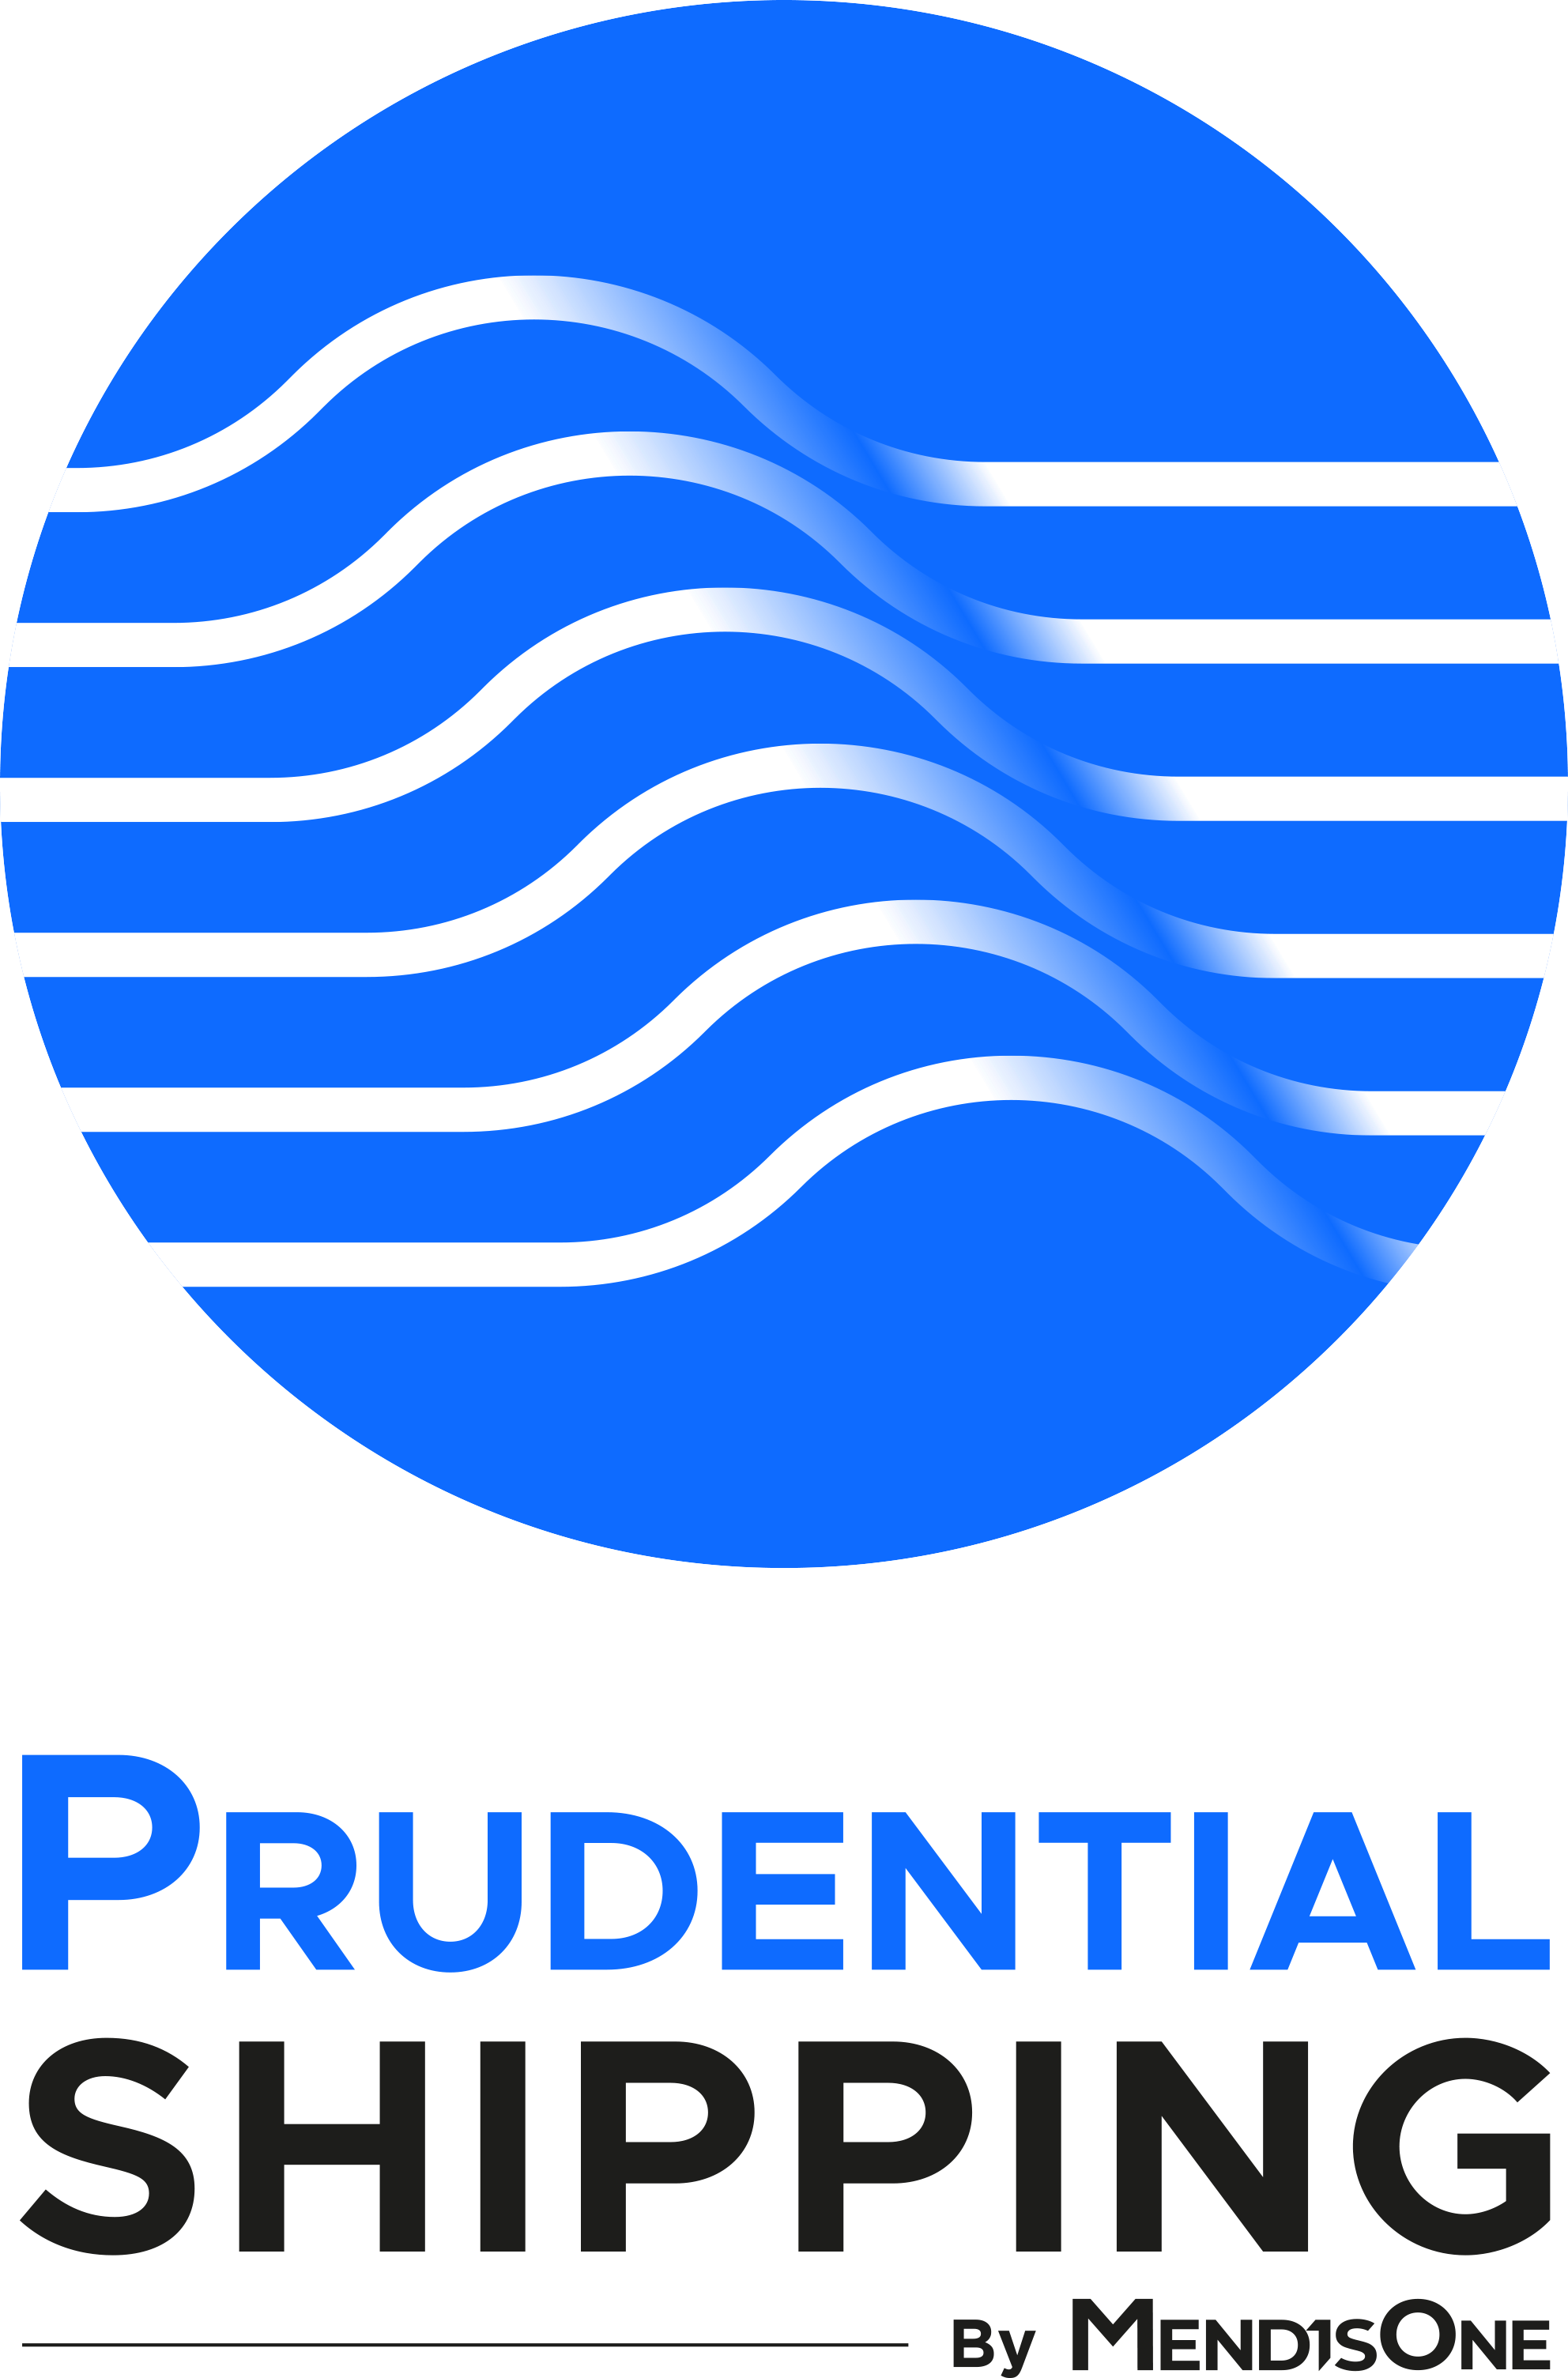 Prudential Shipping